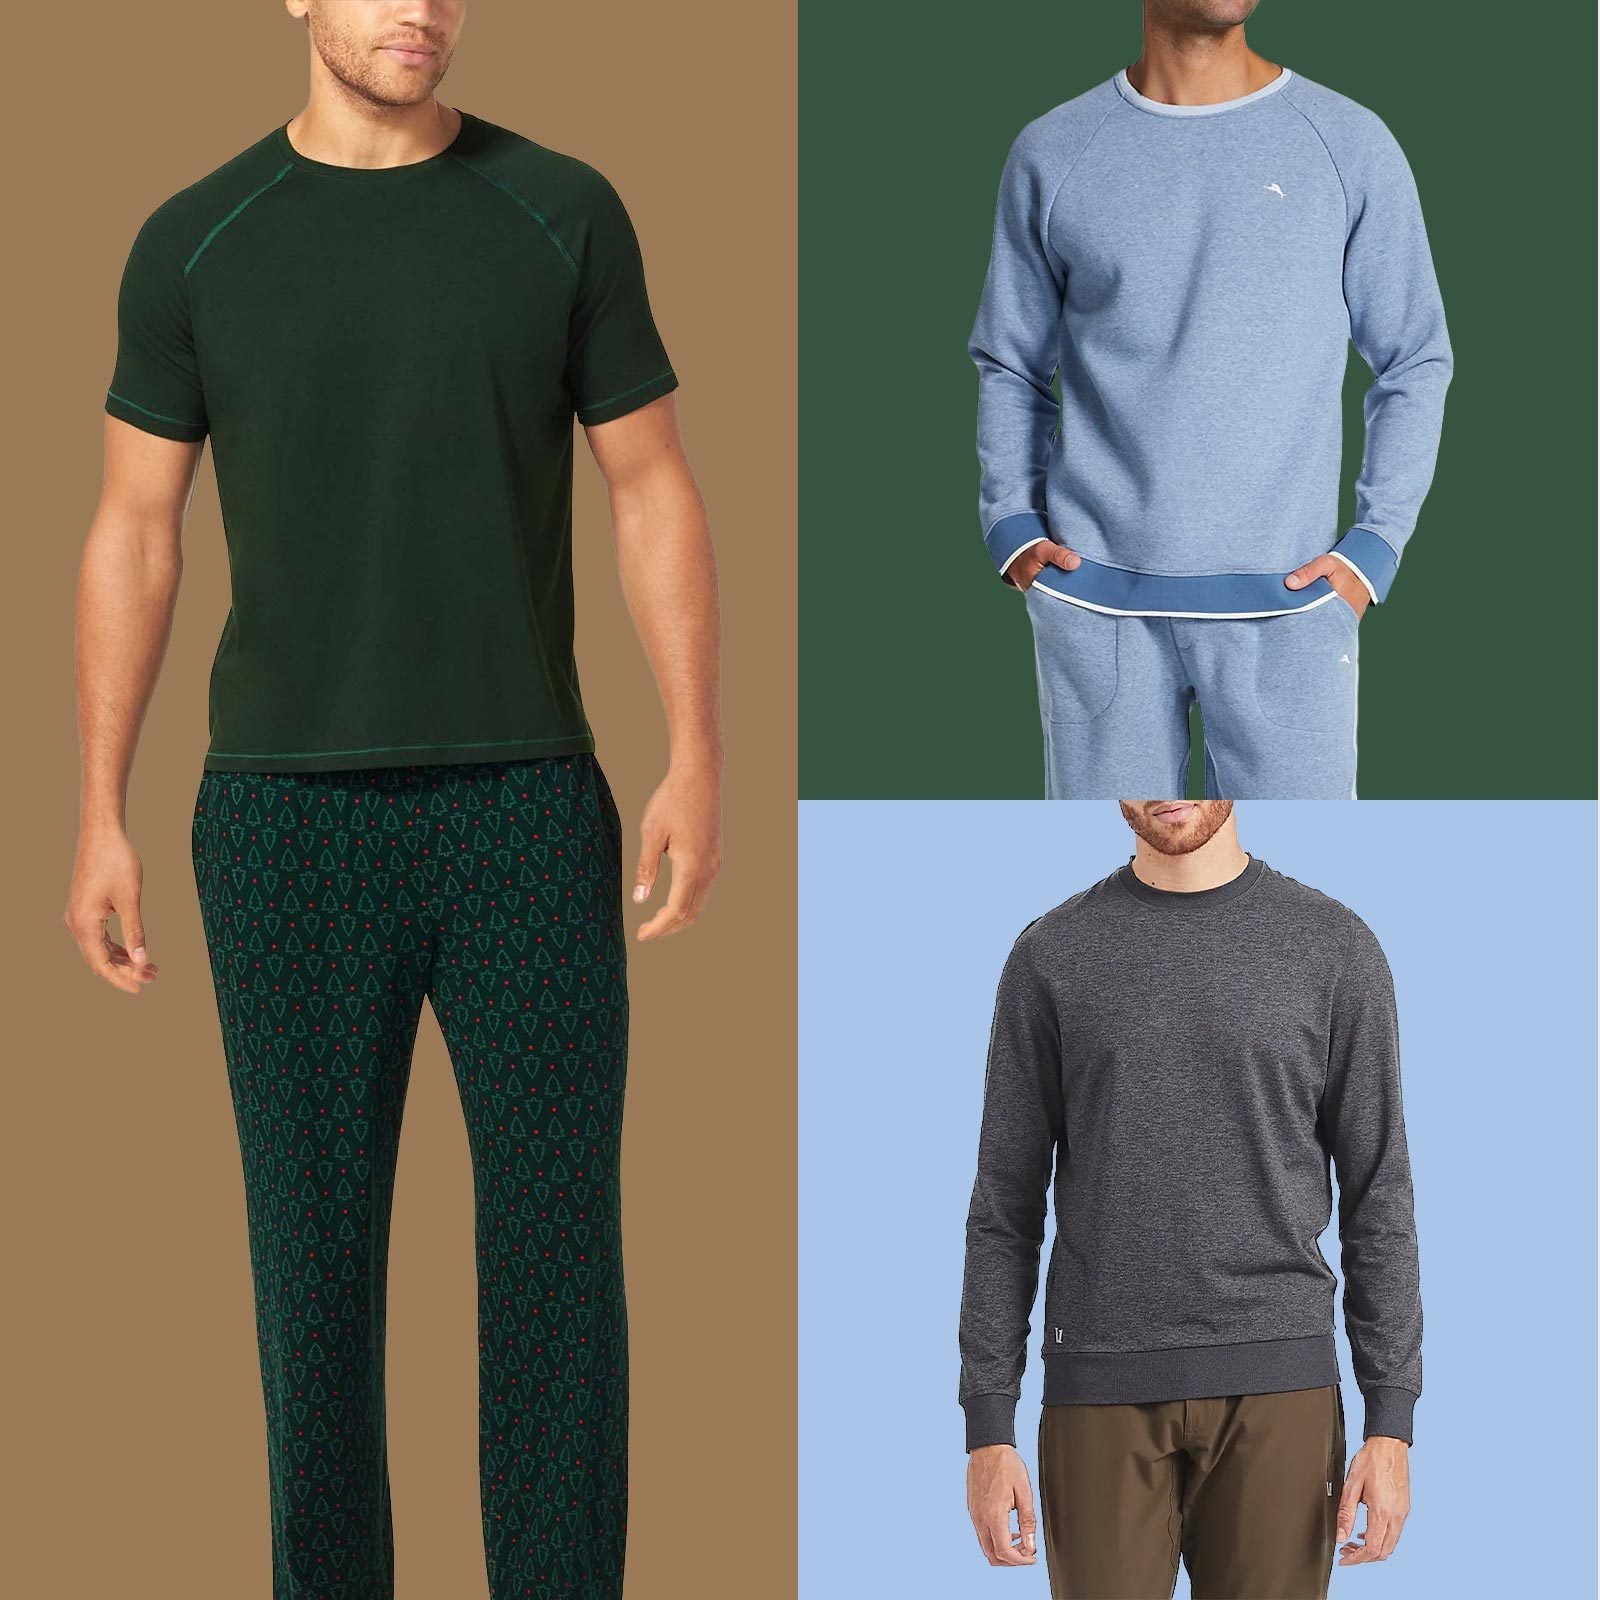 7 Best Men’s Pajamas for the Most Comfortable Night’s Sleep